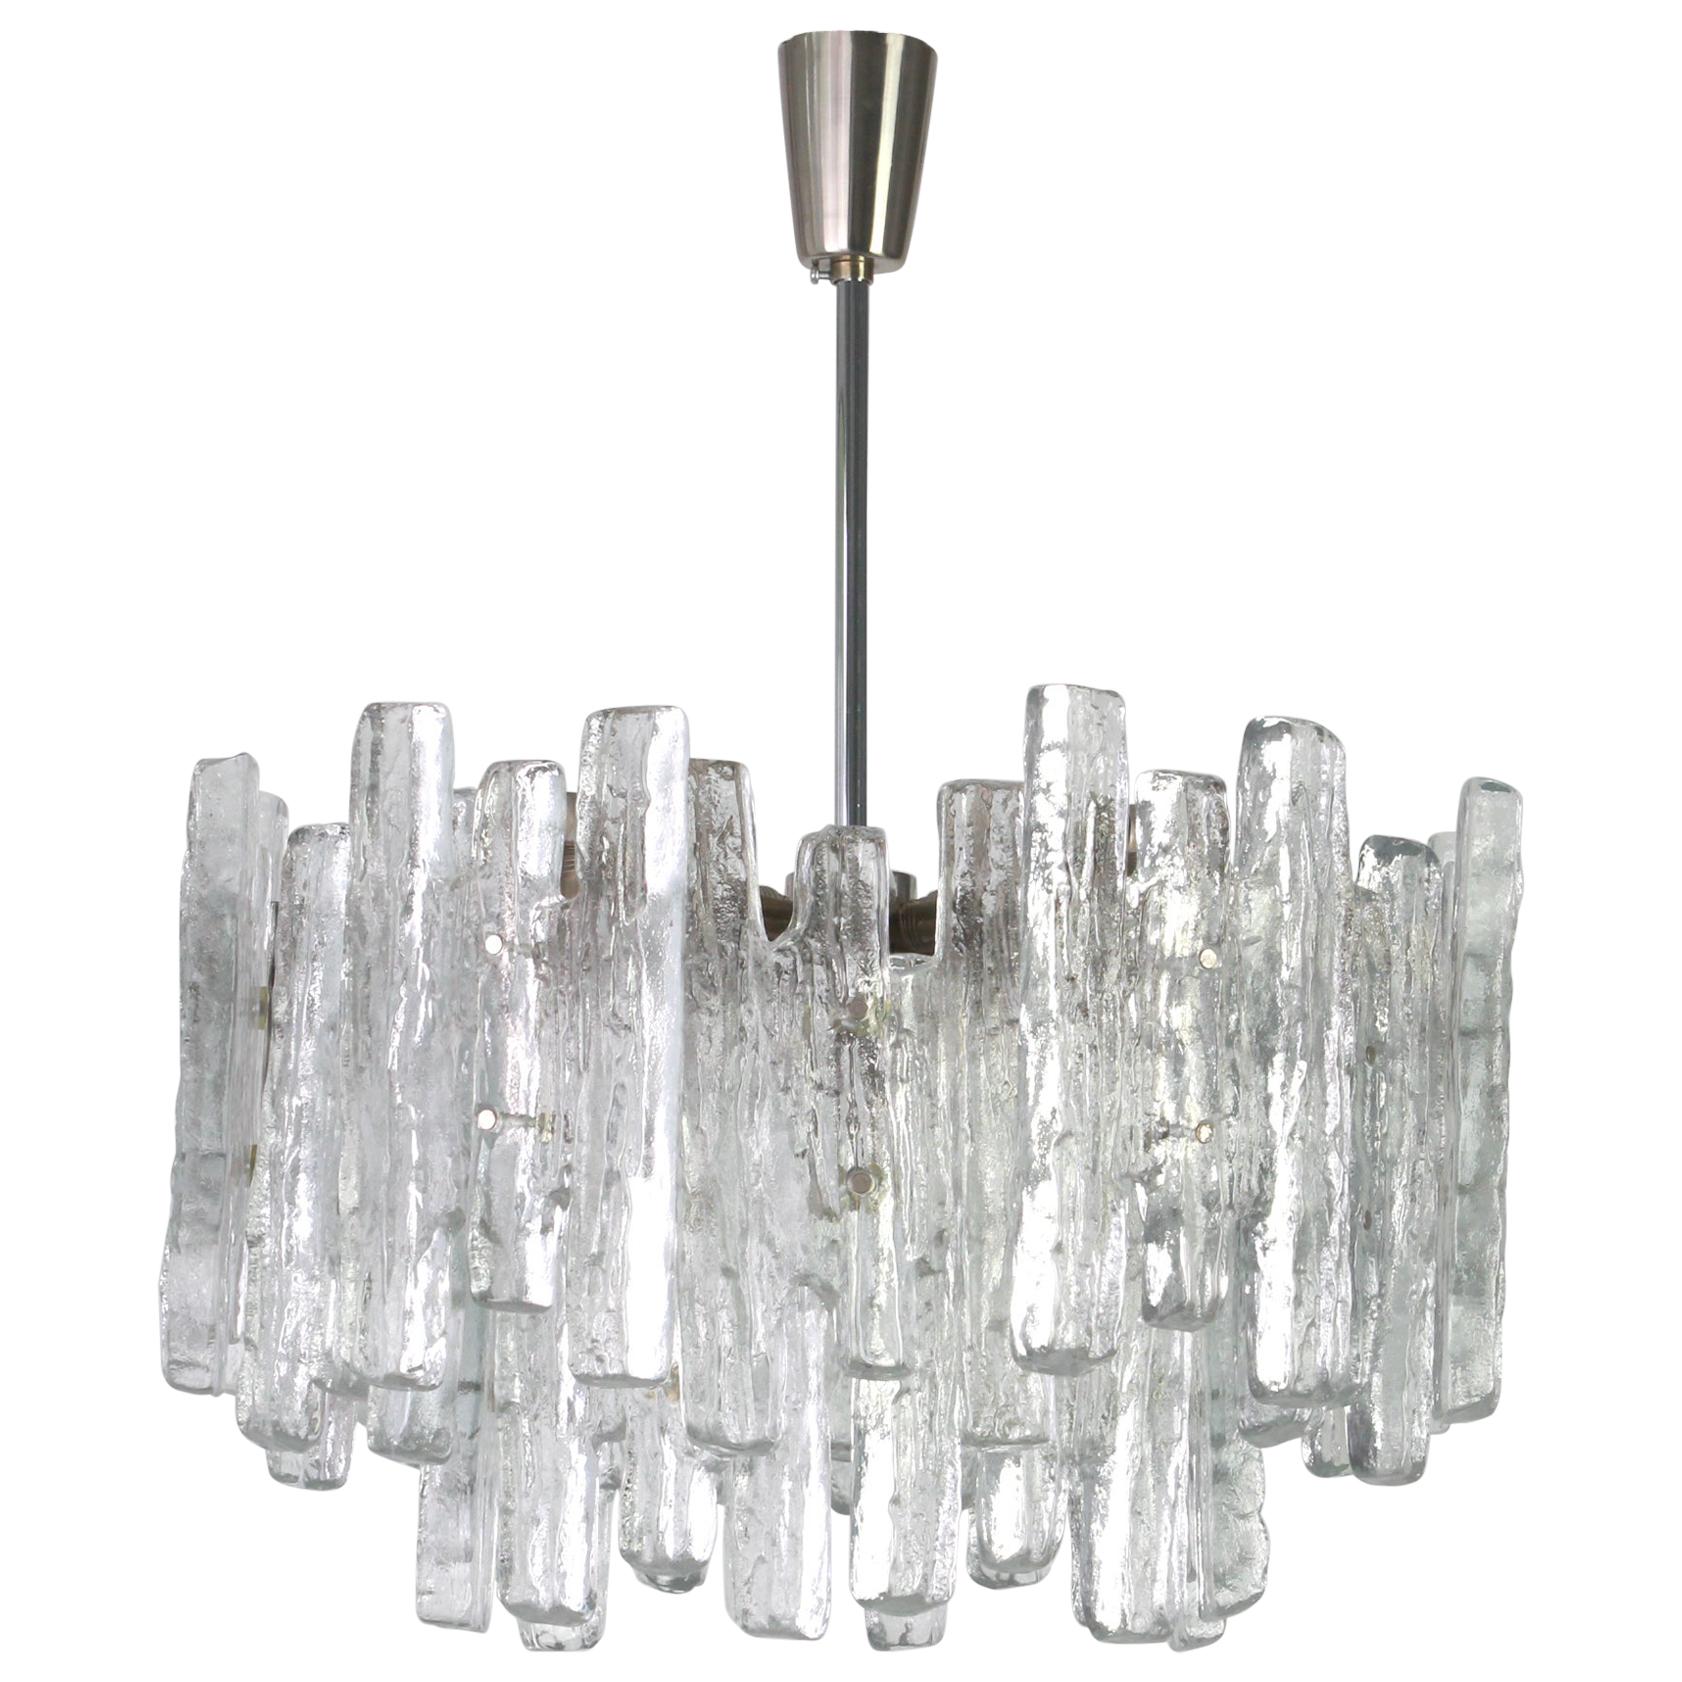 Stunning Murano glass chandelier by Kalmar, 1960s
Three tiers structure gathering many structured glasses, beautifully refracting the light very heavy quality.

High quality and in very good condition. Cleaned, well-wired and ready to use. 

The